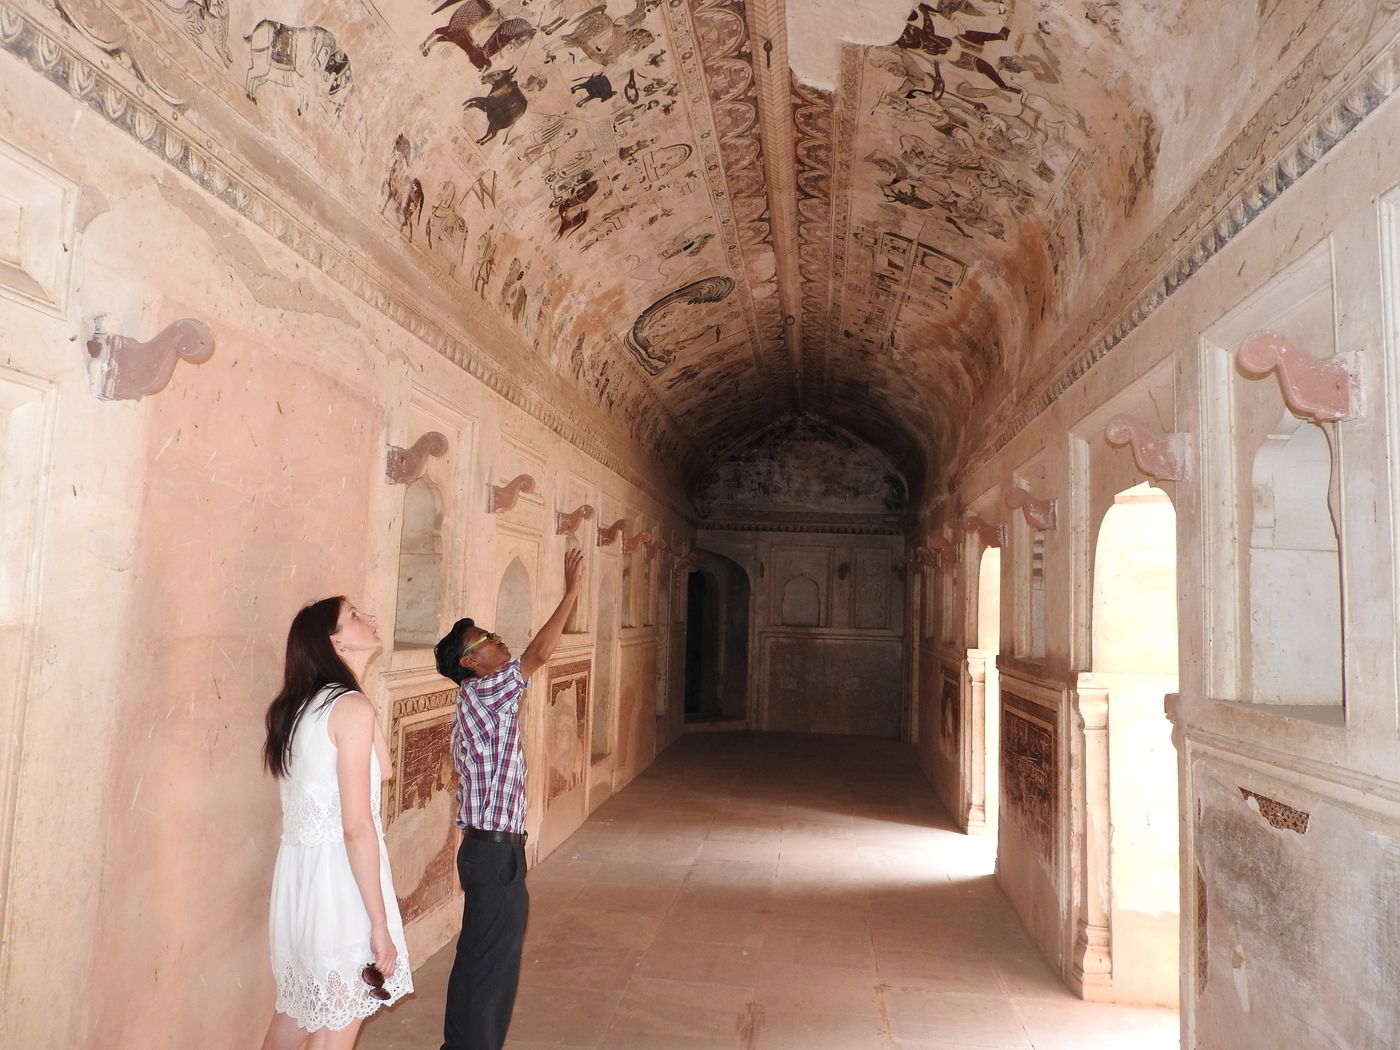 The curved ceiling inside Lakshmi Narayan temple, lined with murals dedicated to Goddess Laxmi, located in Orchha 